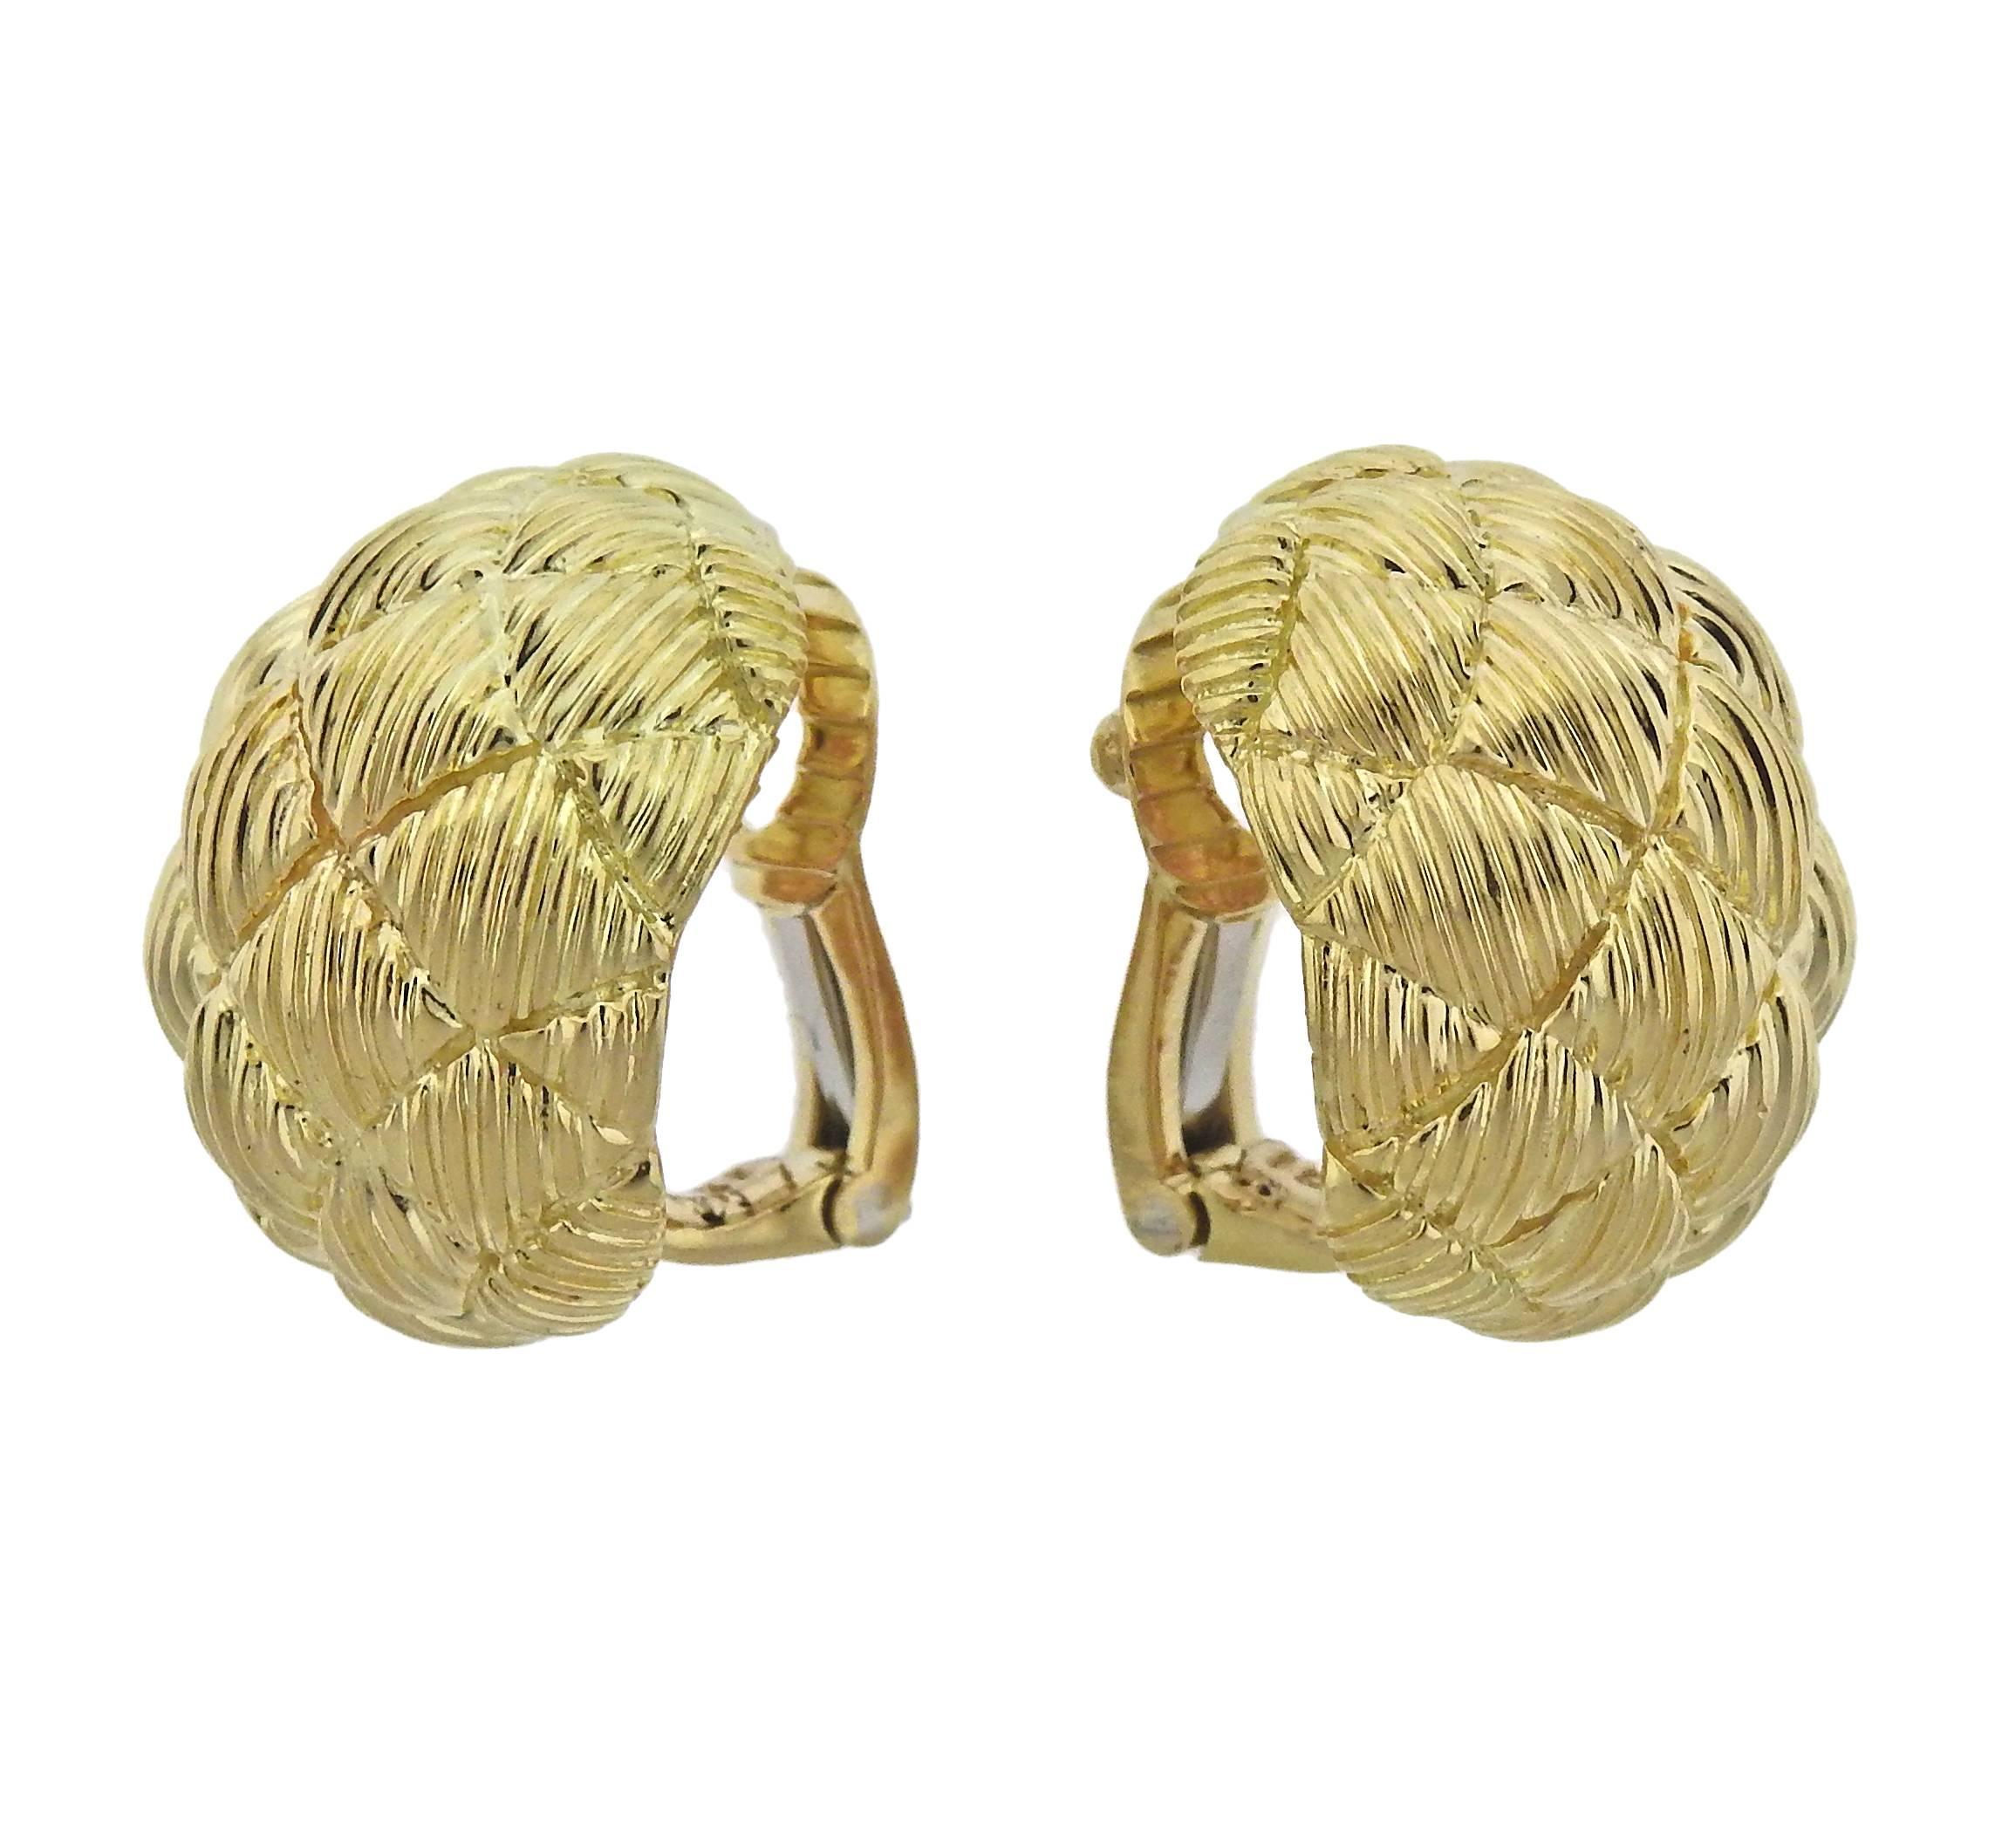  Pair of 18k yellow gold half hoop woven earrings, crafted by David Webb. Earrings are 21mm x 17mm, weigh 26.5 grams. Marked: Webb 18k.